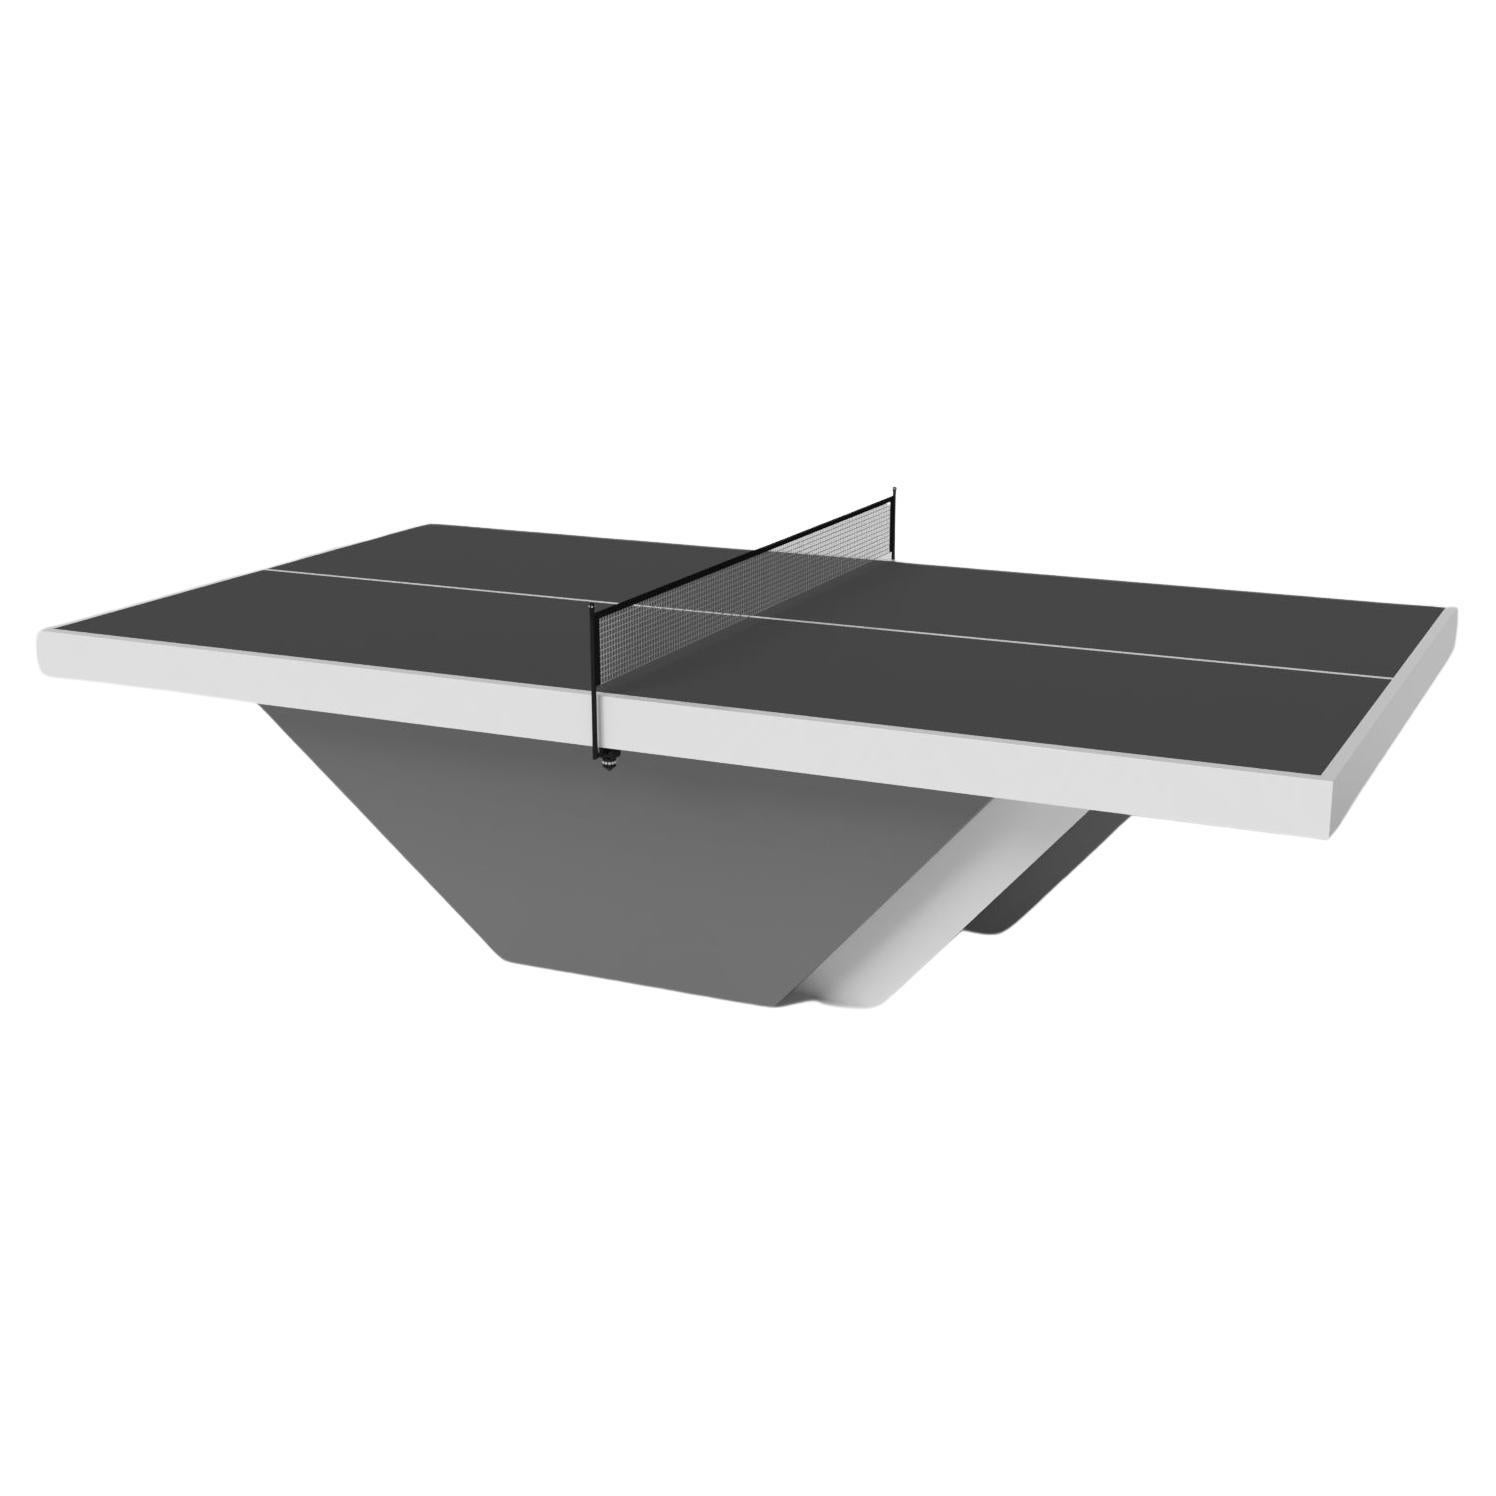 Elevate Customs Vogue Tennis Table /Solid Pantone White Color in 9' -Made in USA For Sale